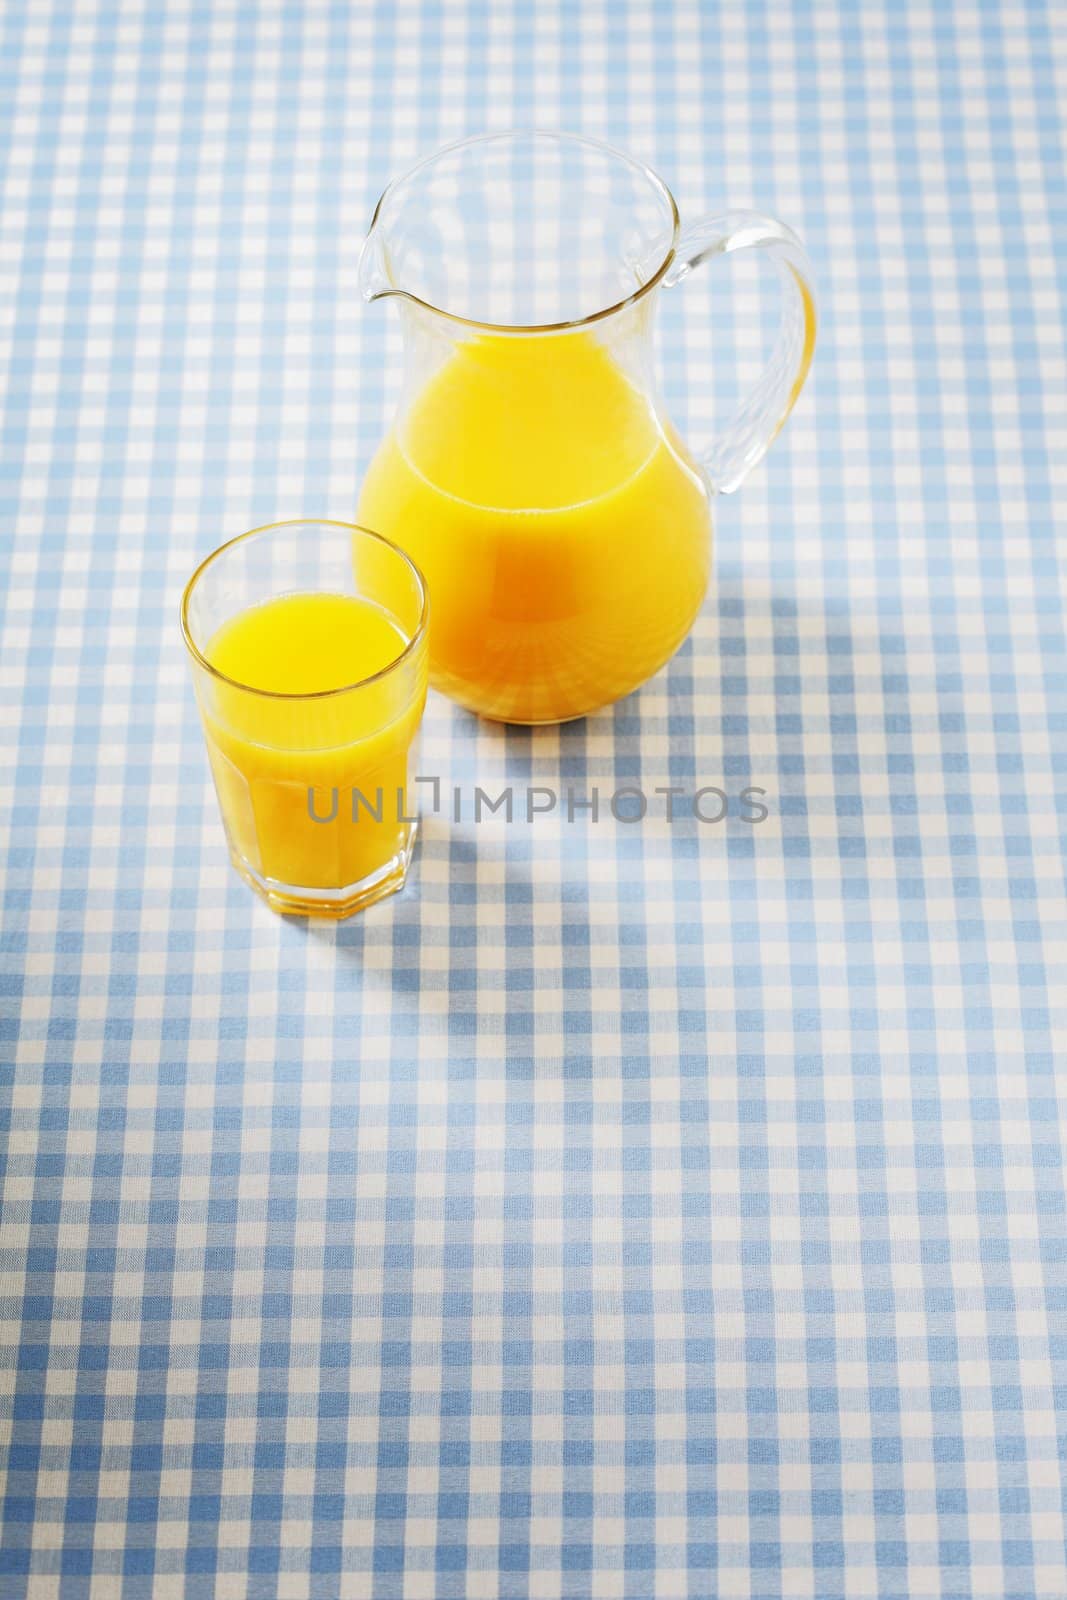 Glass of juice with a pitcher on plaid tablecloth